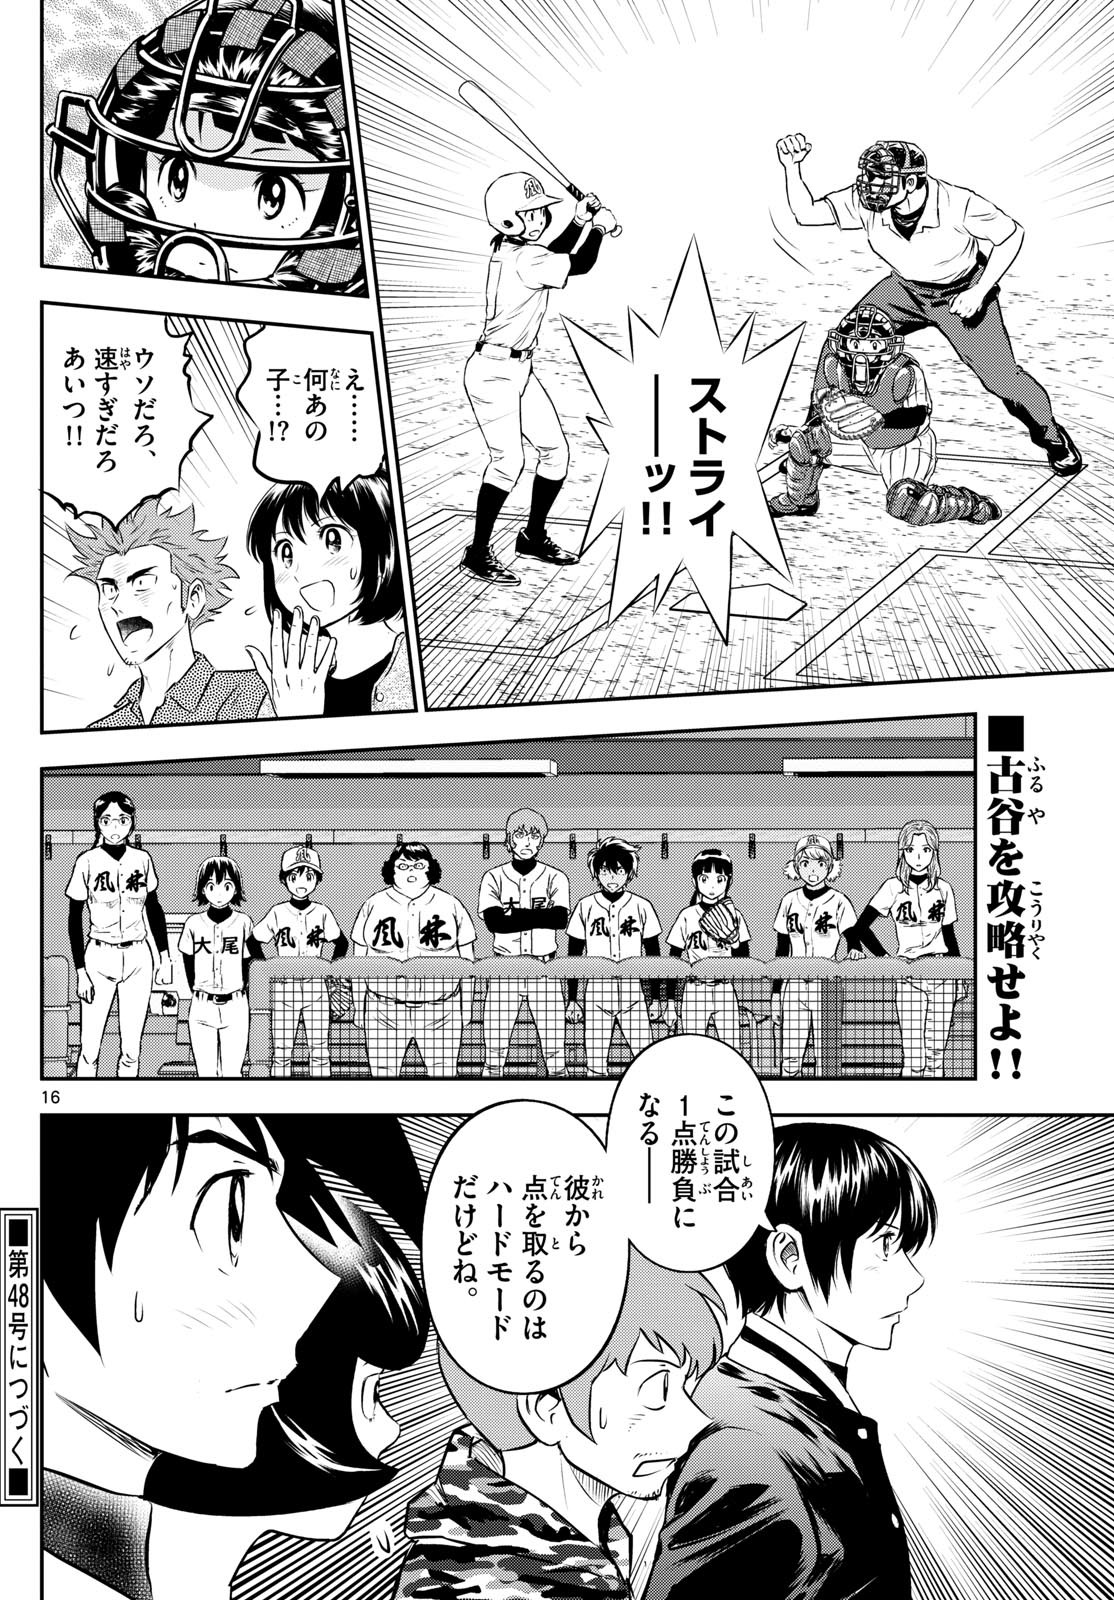 Major 2nd - メジャーセカンド - Chapter 265 - Page 16